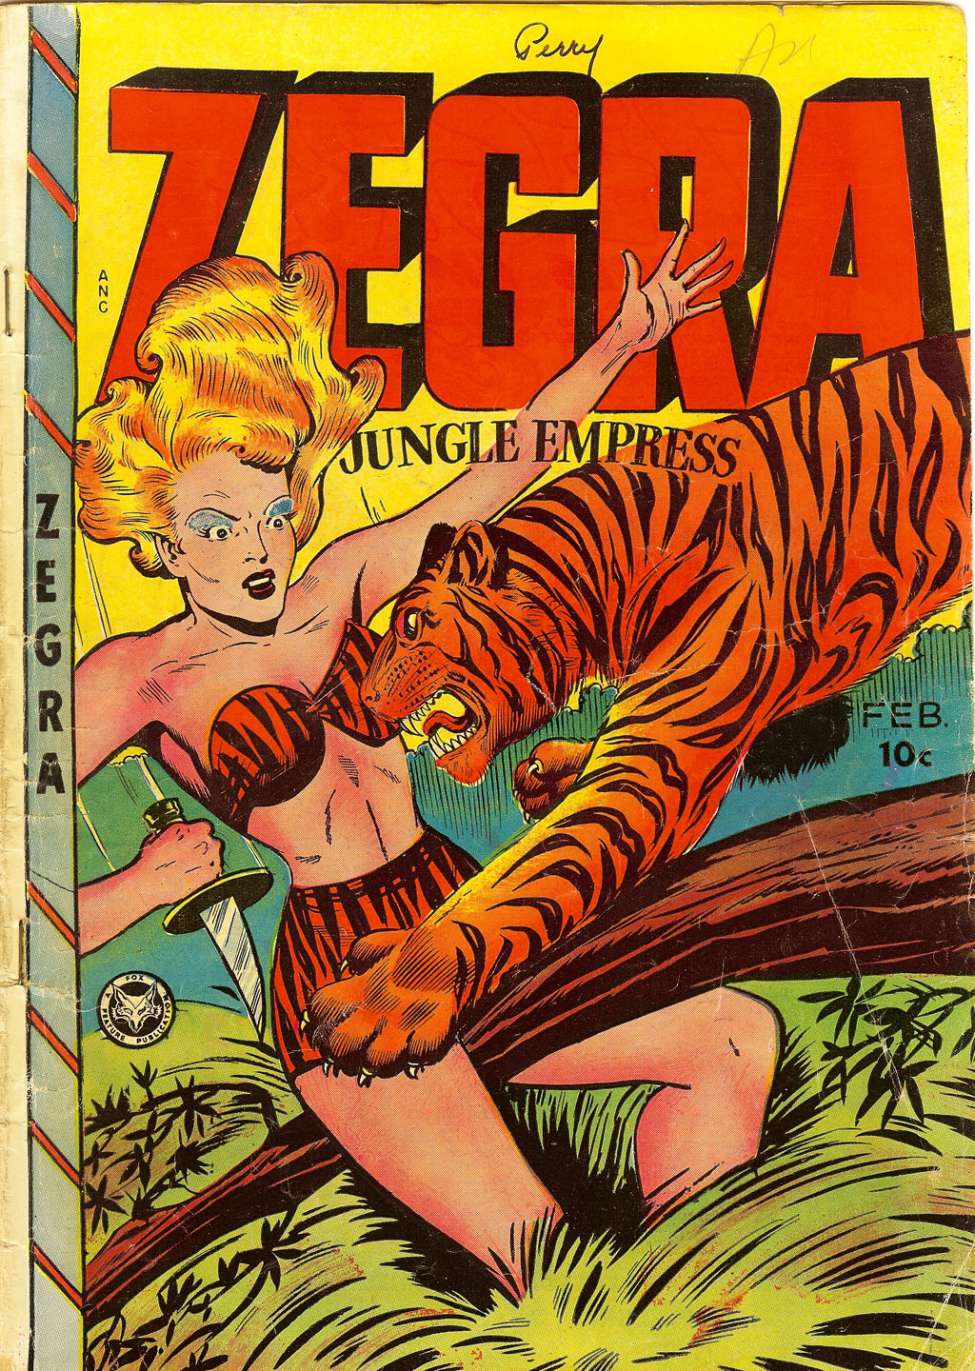 Comic Book Cover For Zegra 4